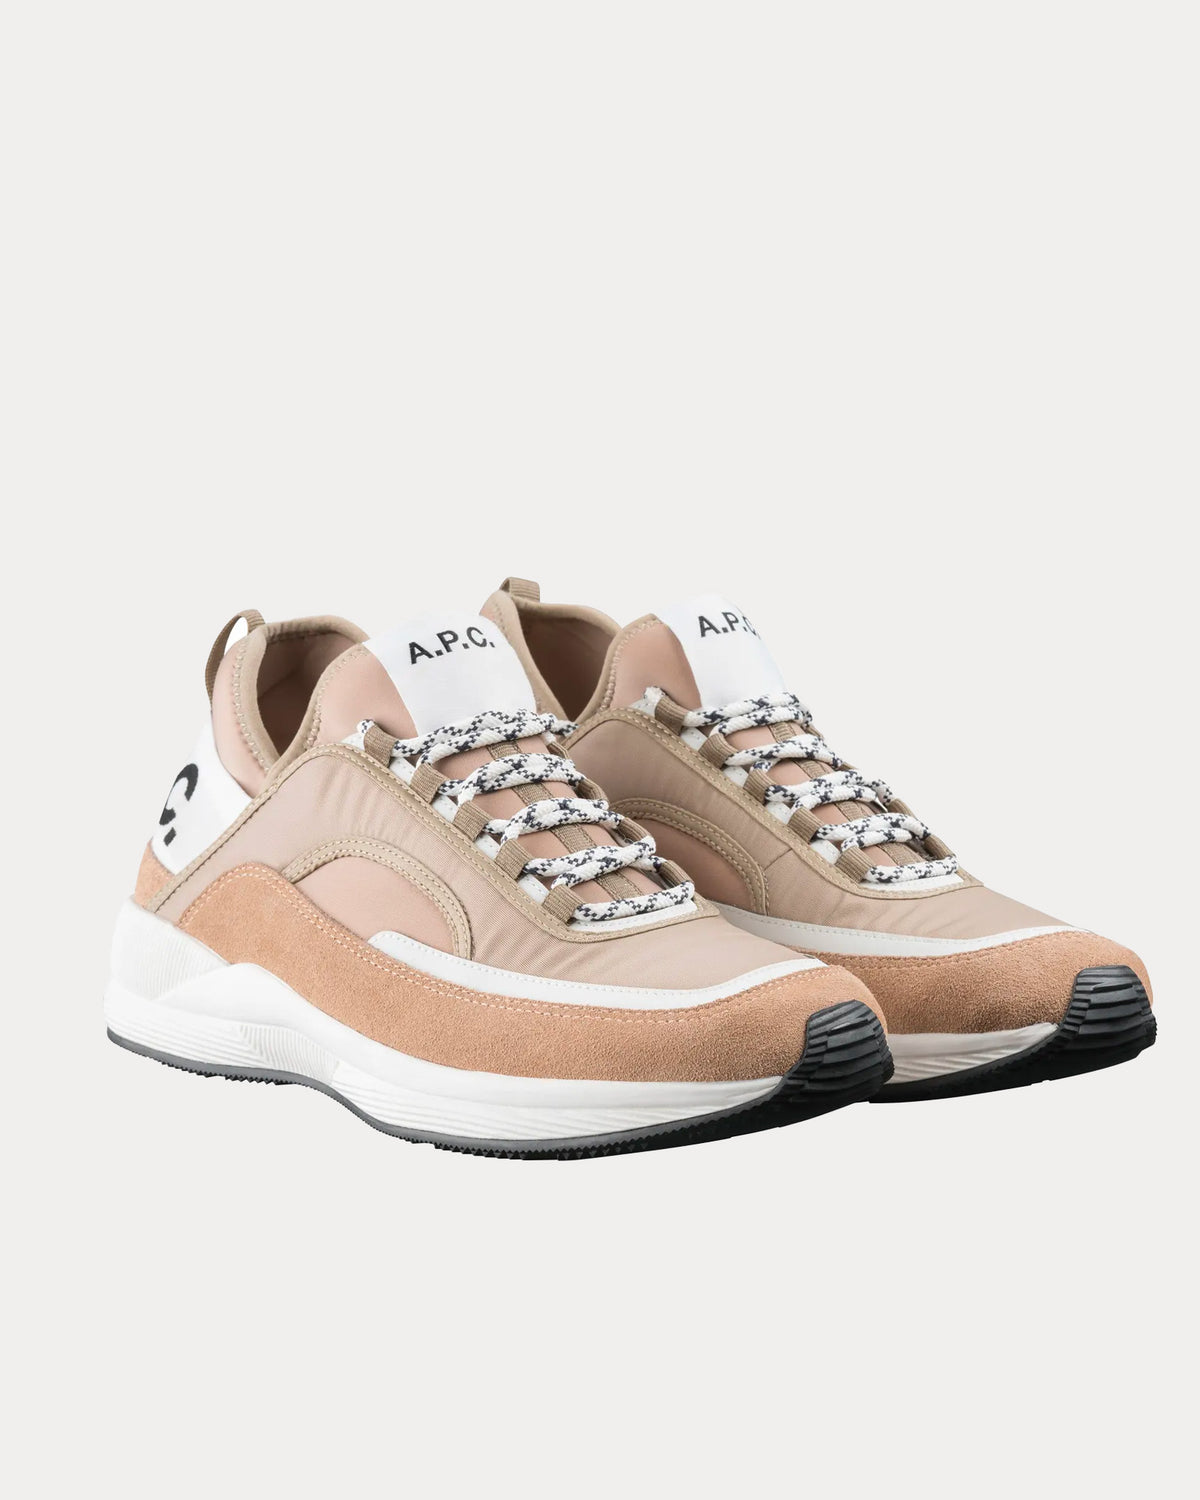 A.P.C. Run Around Taupe Low Top Sneakers - Sneak in Peace